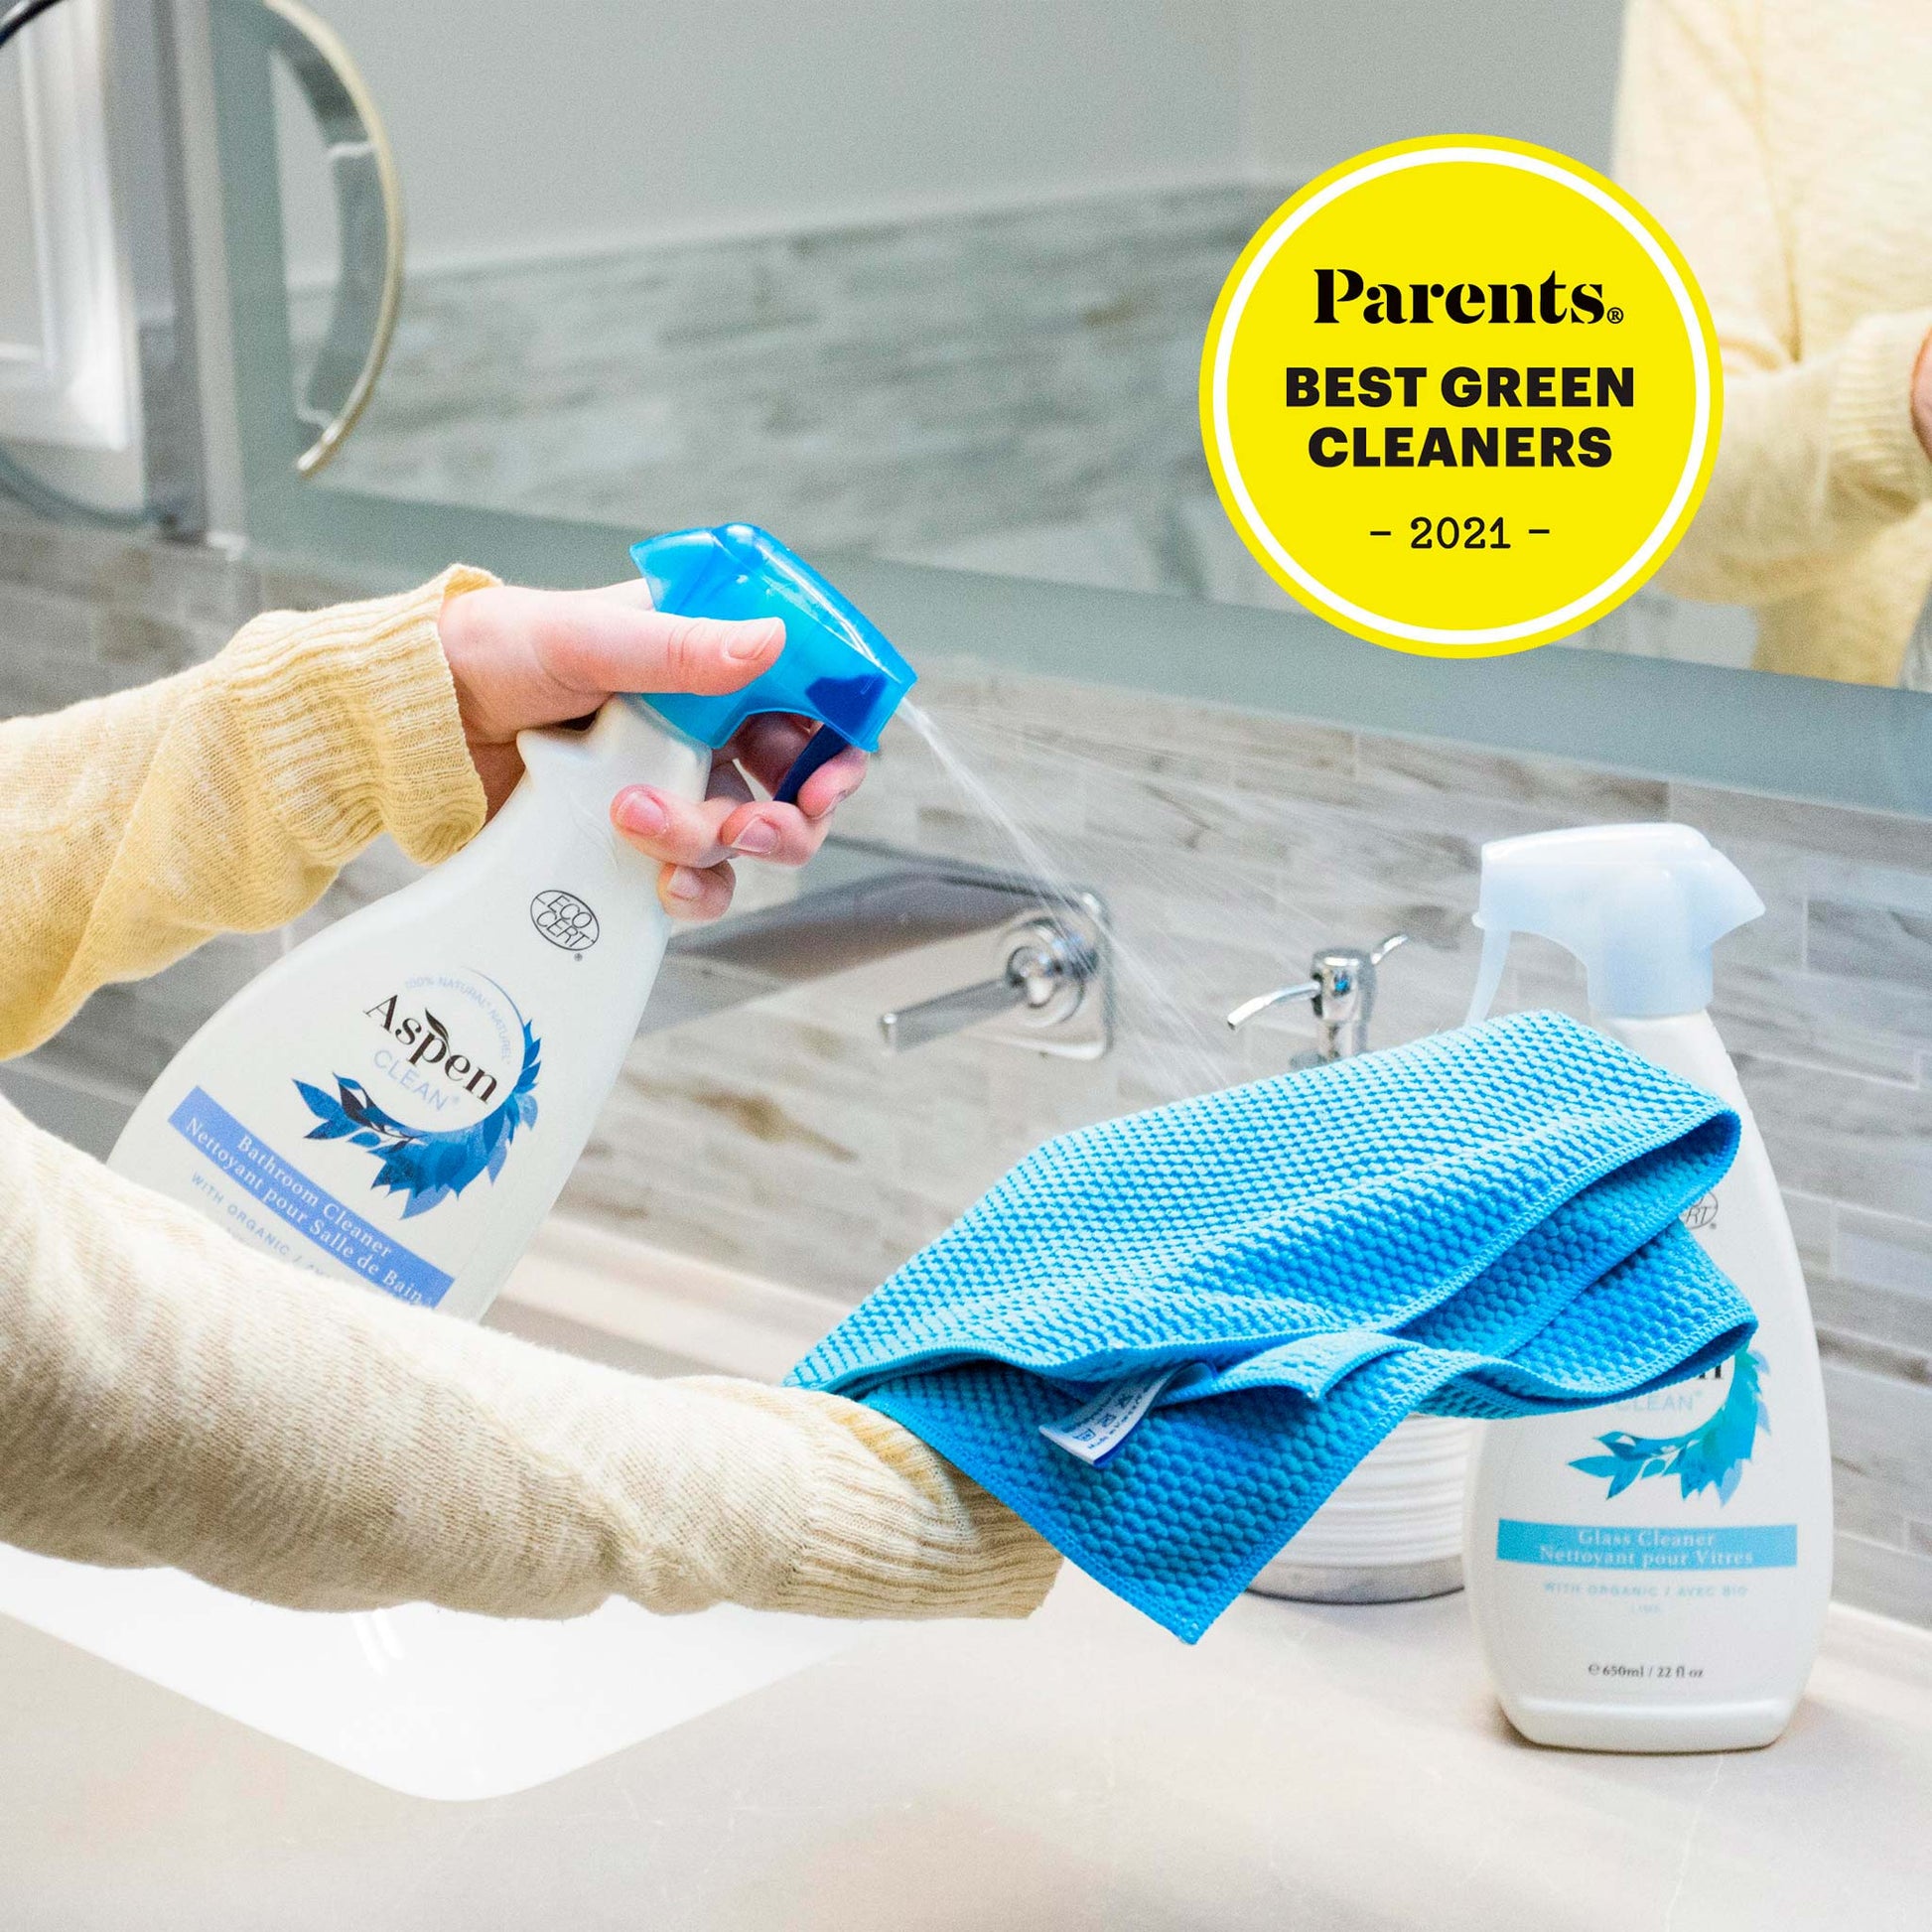 The Bathroom Cleaning Kit